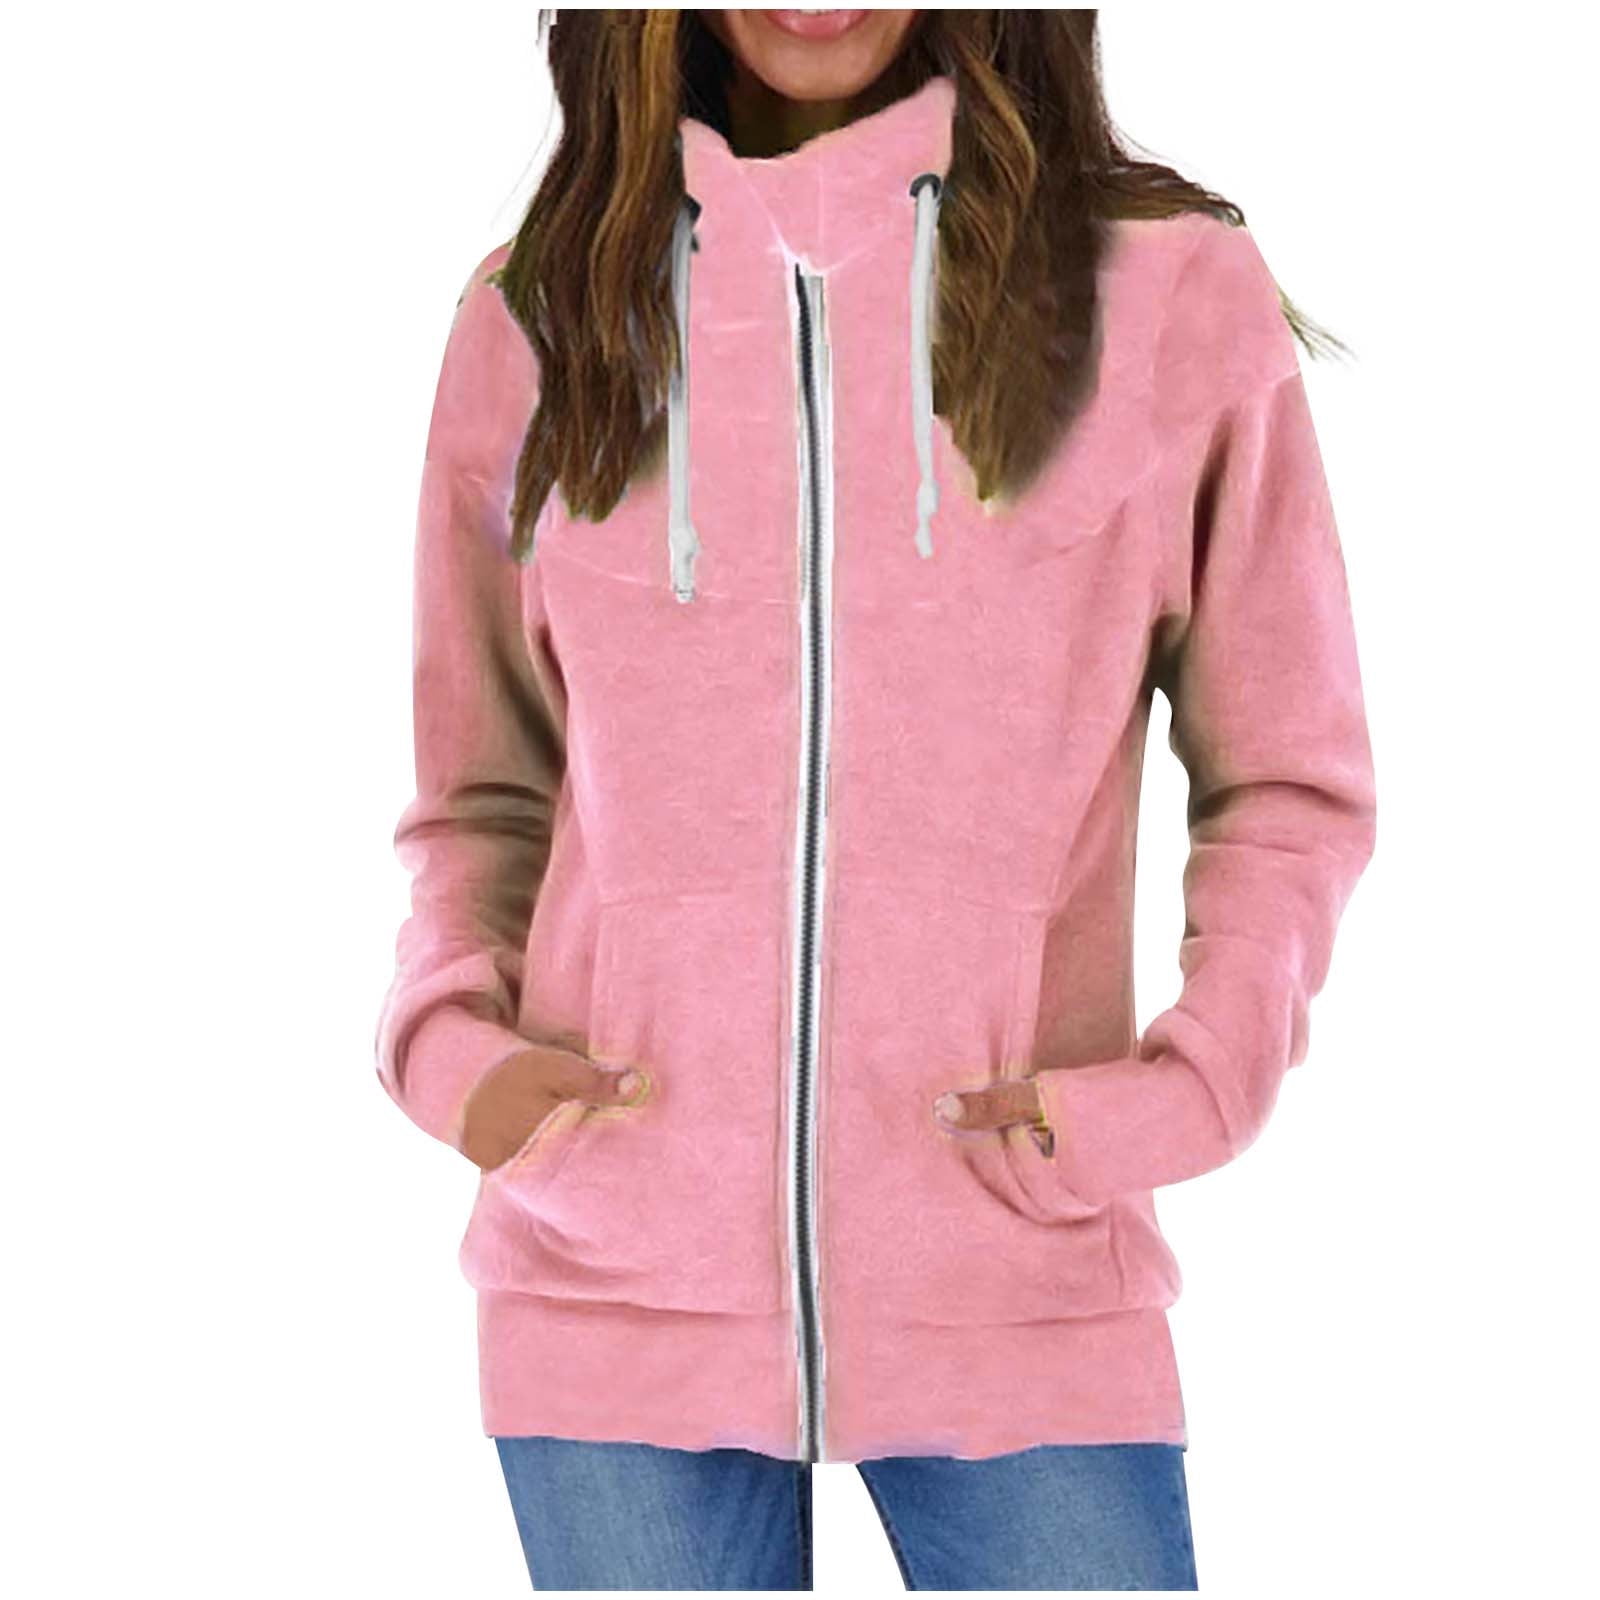 Exist Royal Blue Zip-Up Hoodie - Women | Best Price and Reviews | Zulily